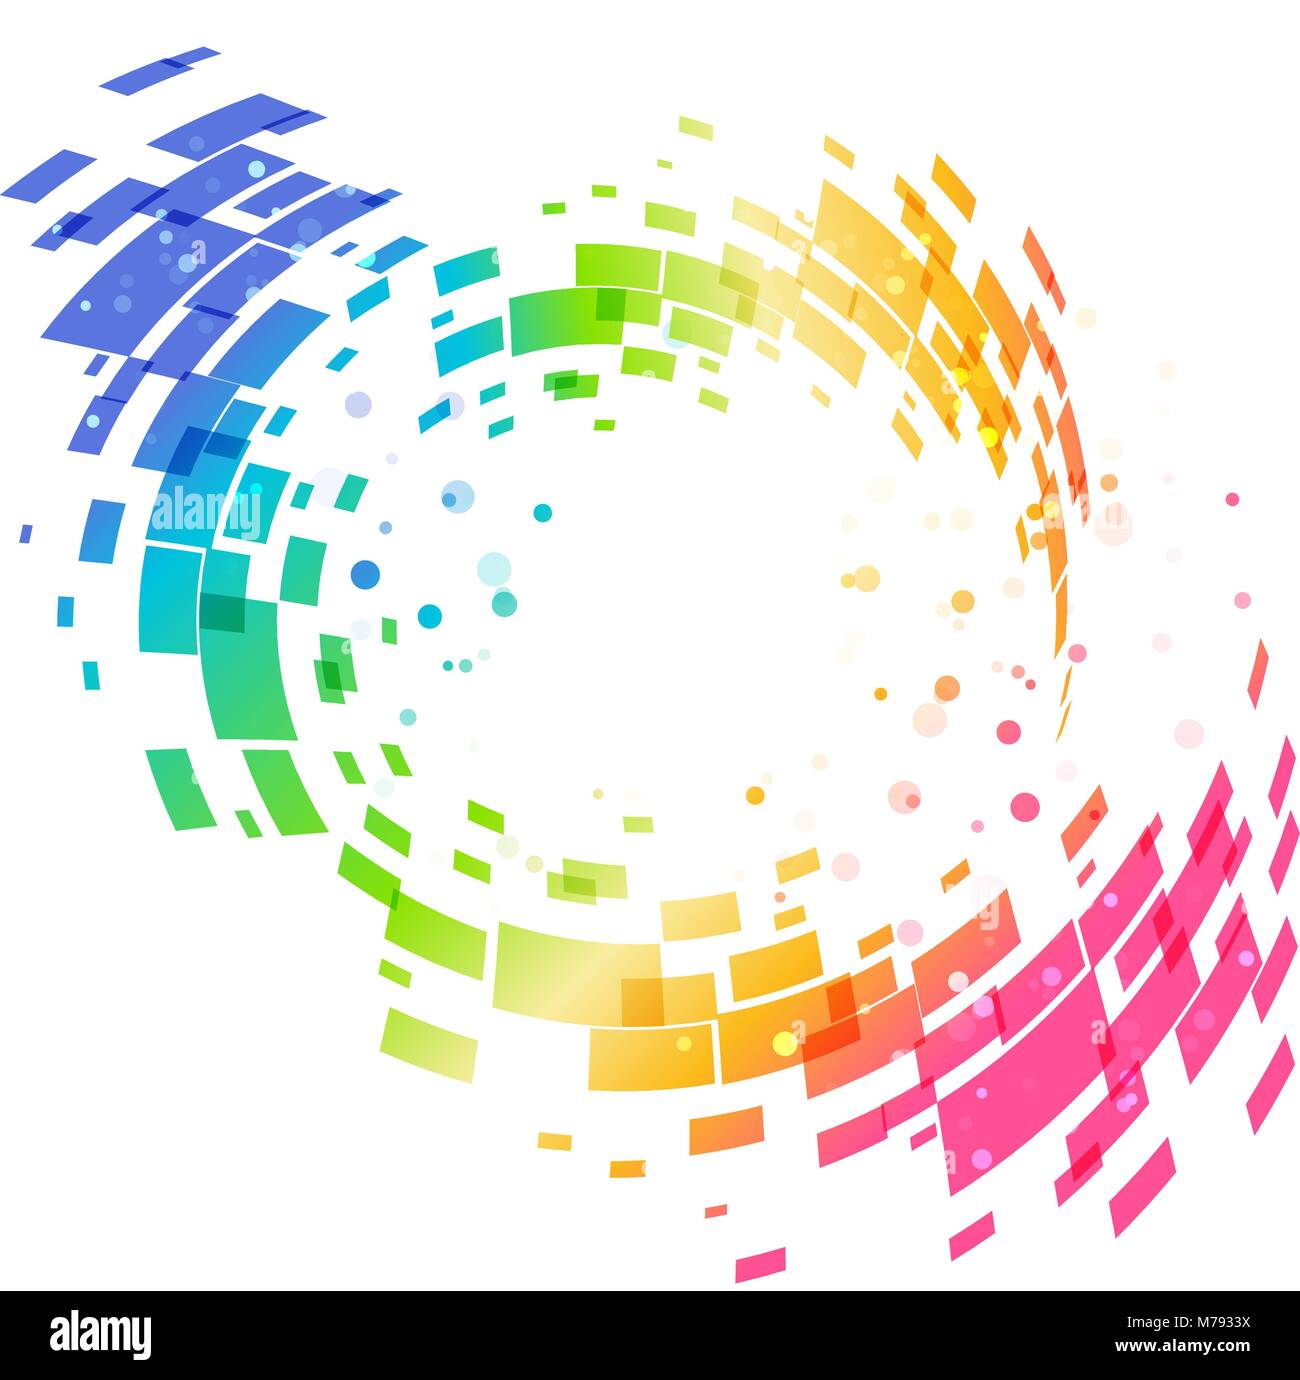 Abstract geometric colorful circular background, design element, frame background Stock Vector